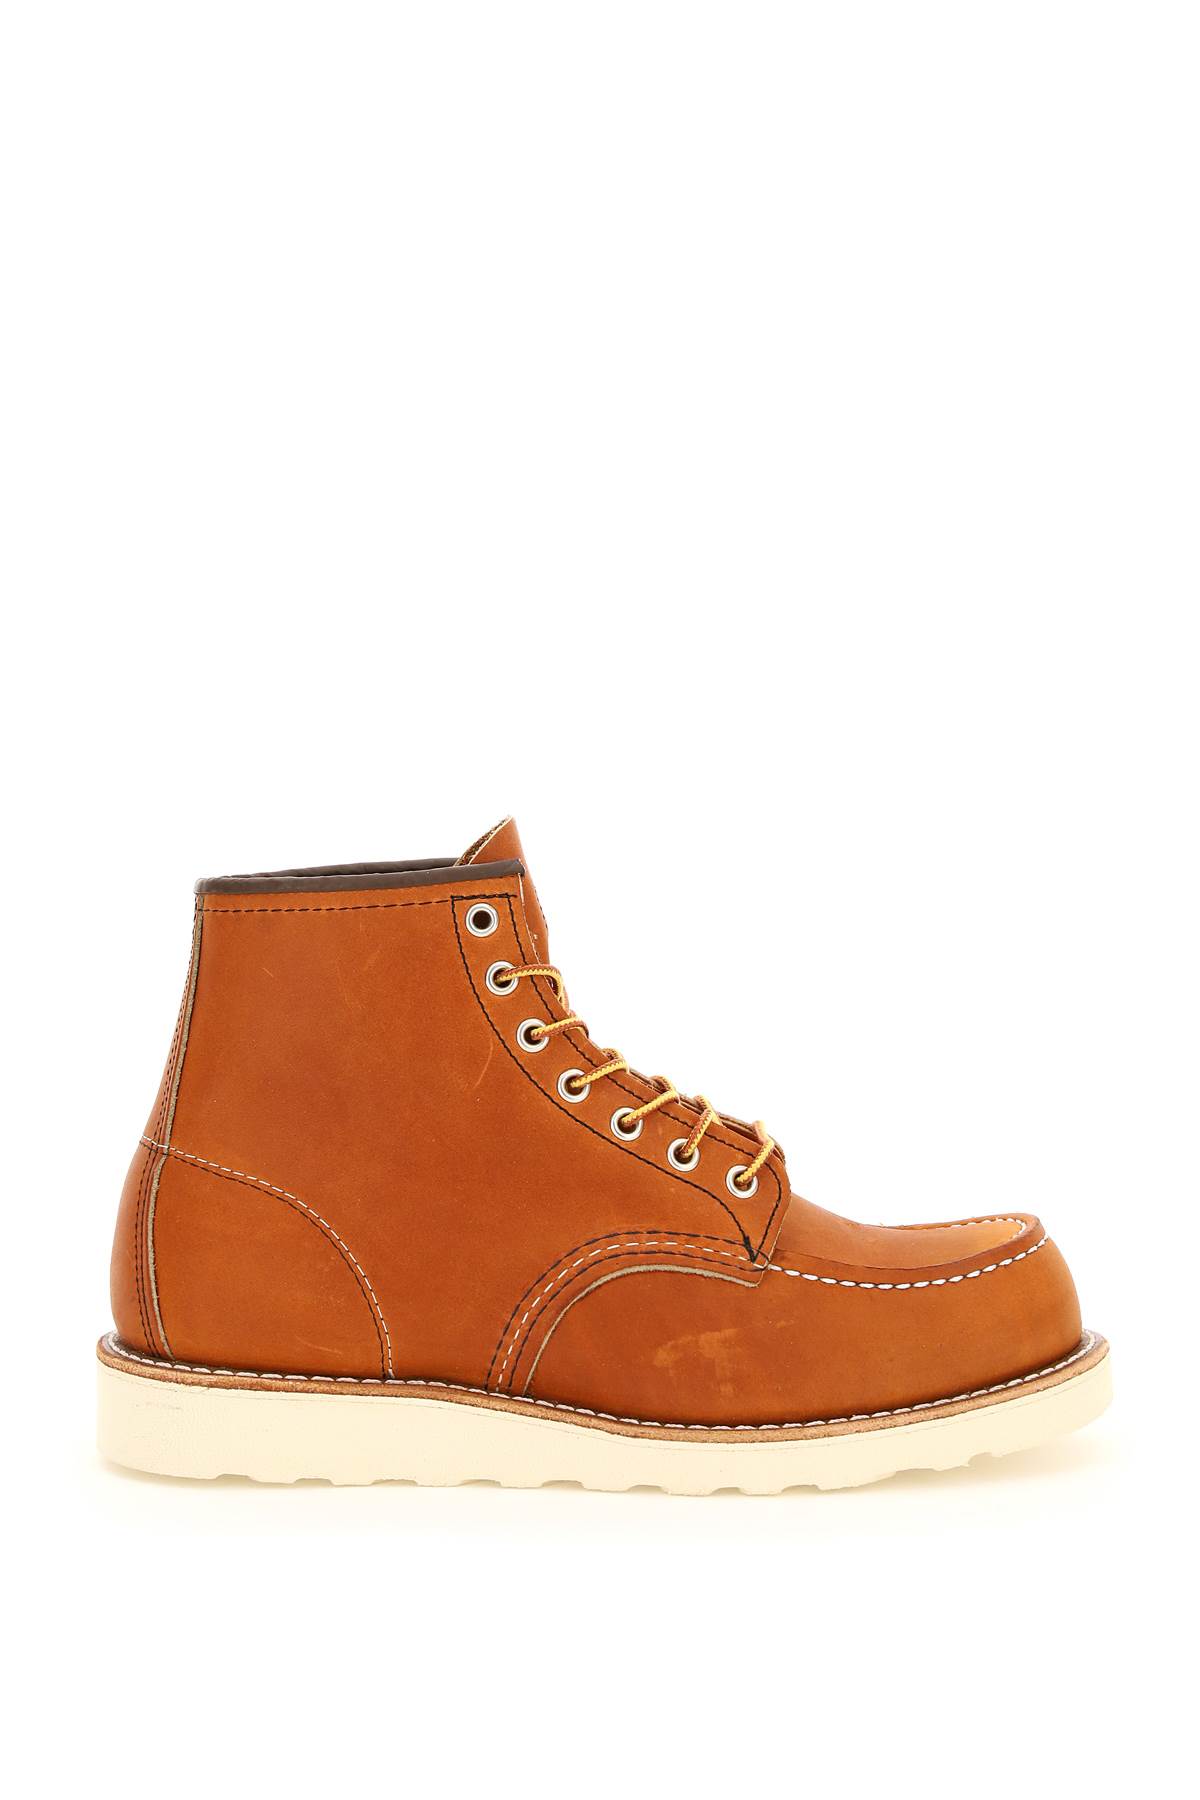 Red Wing Classic Moc Toe Ankle Boots In Oro Legacy (brown)